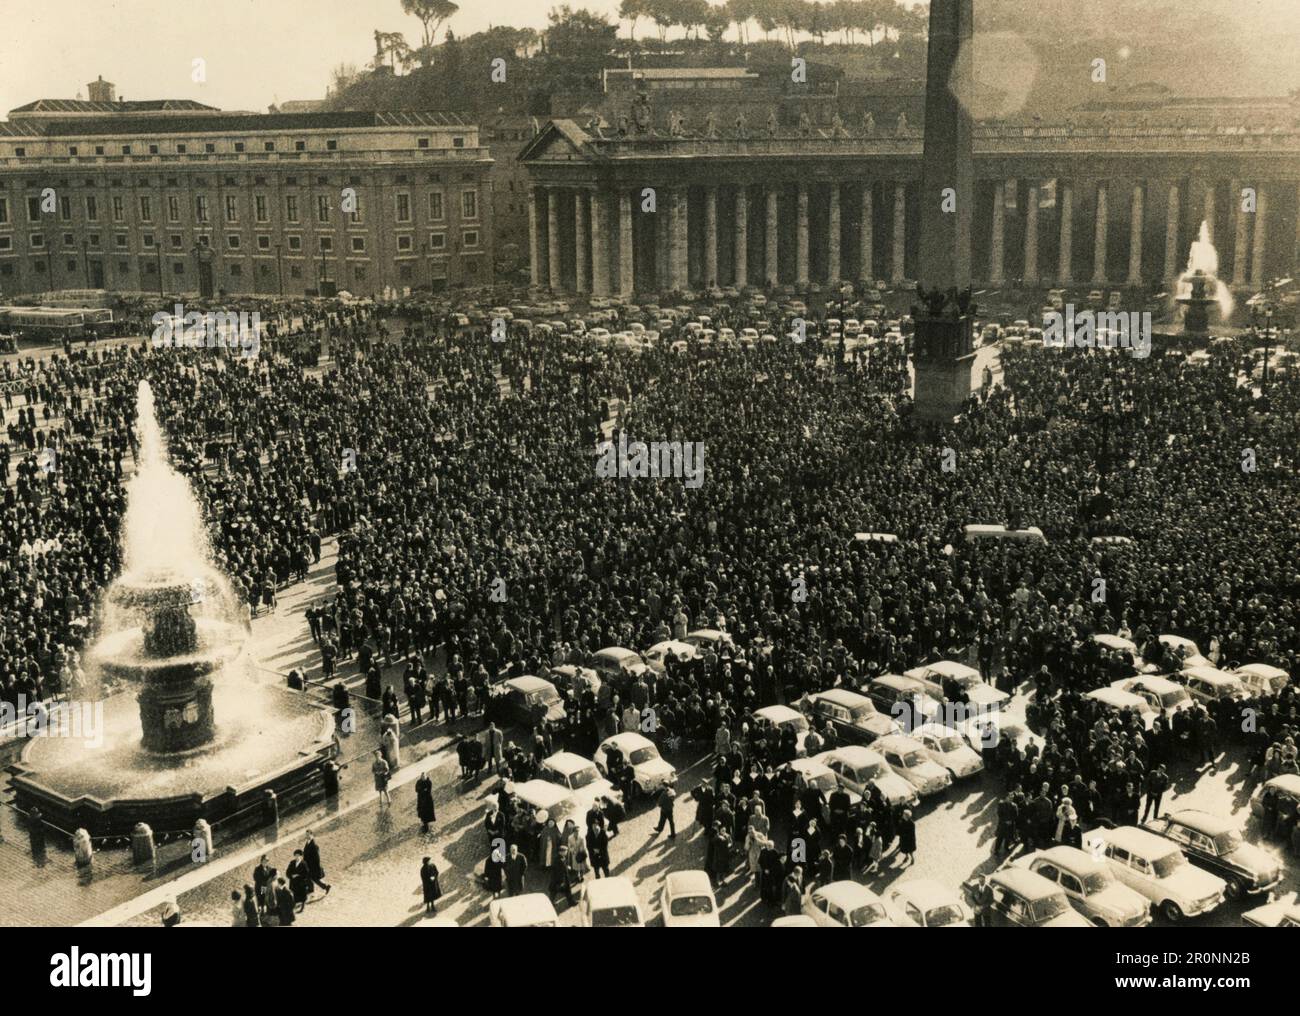 Crowd of faithfuls gathered in St. Peter's Square to see the Pope, Italy 1963 Stock Photo